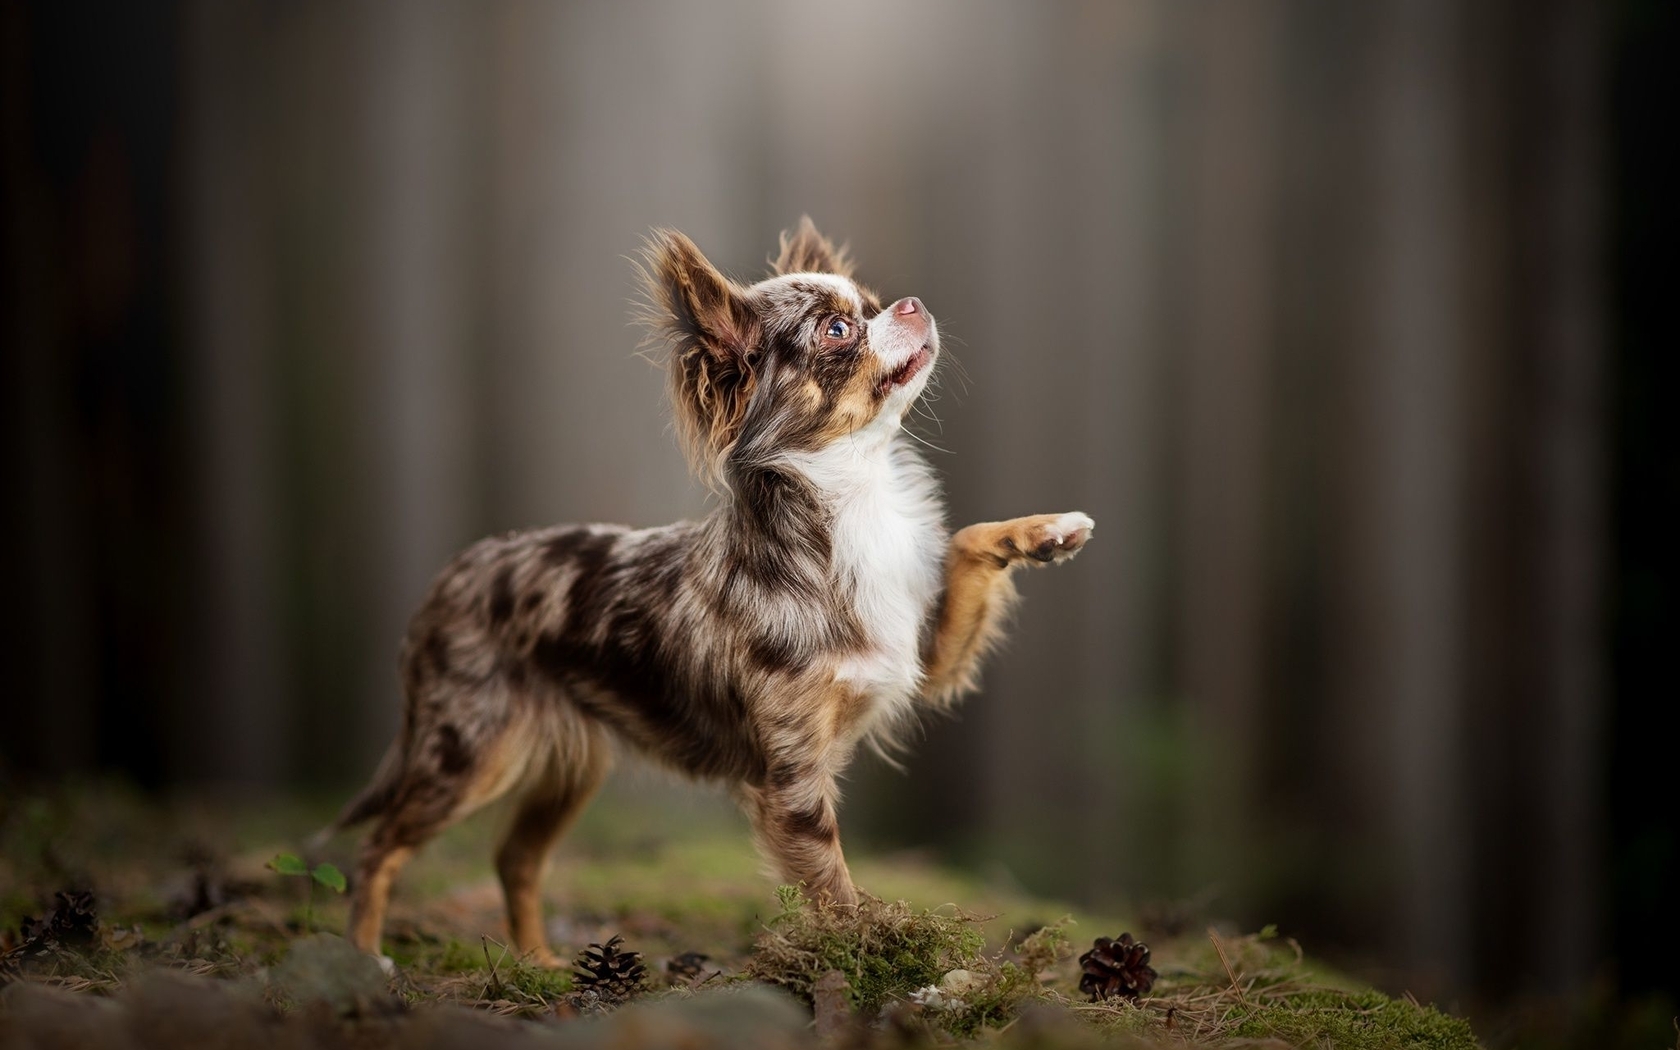 Image: Chihuahua, breed, dog, dog, forest, pine cone, moss, a raised paw